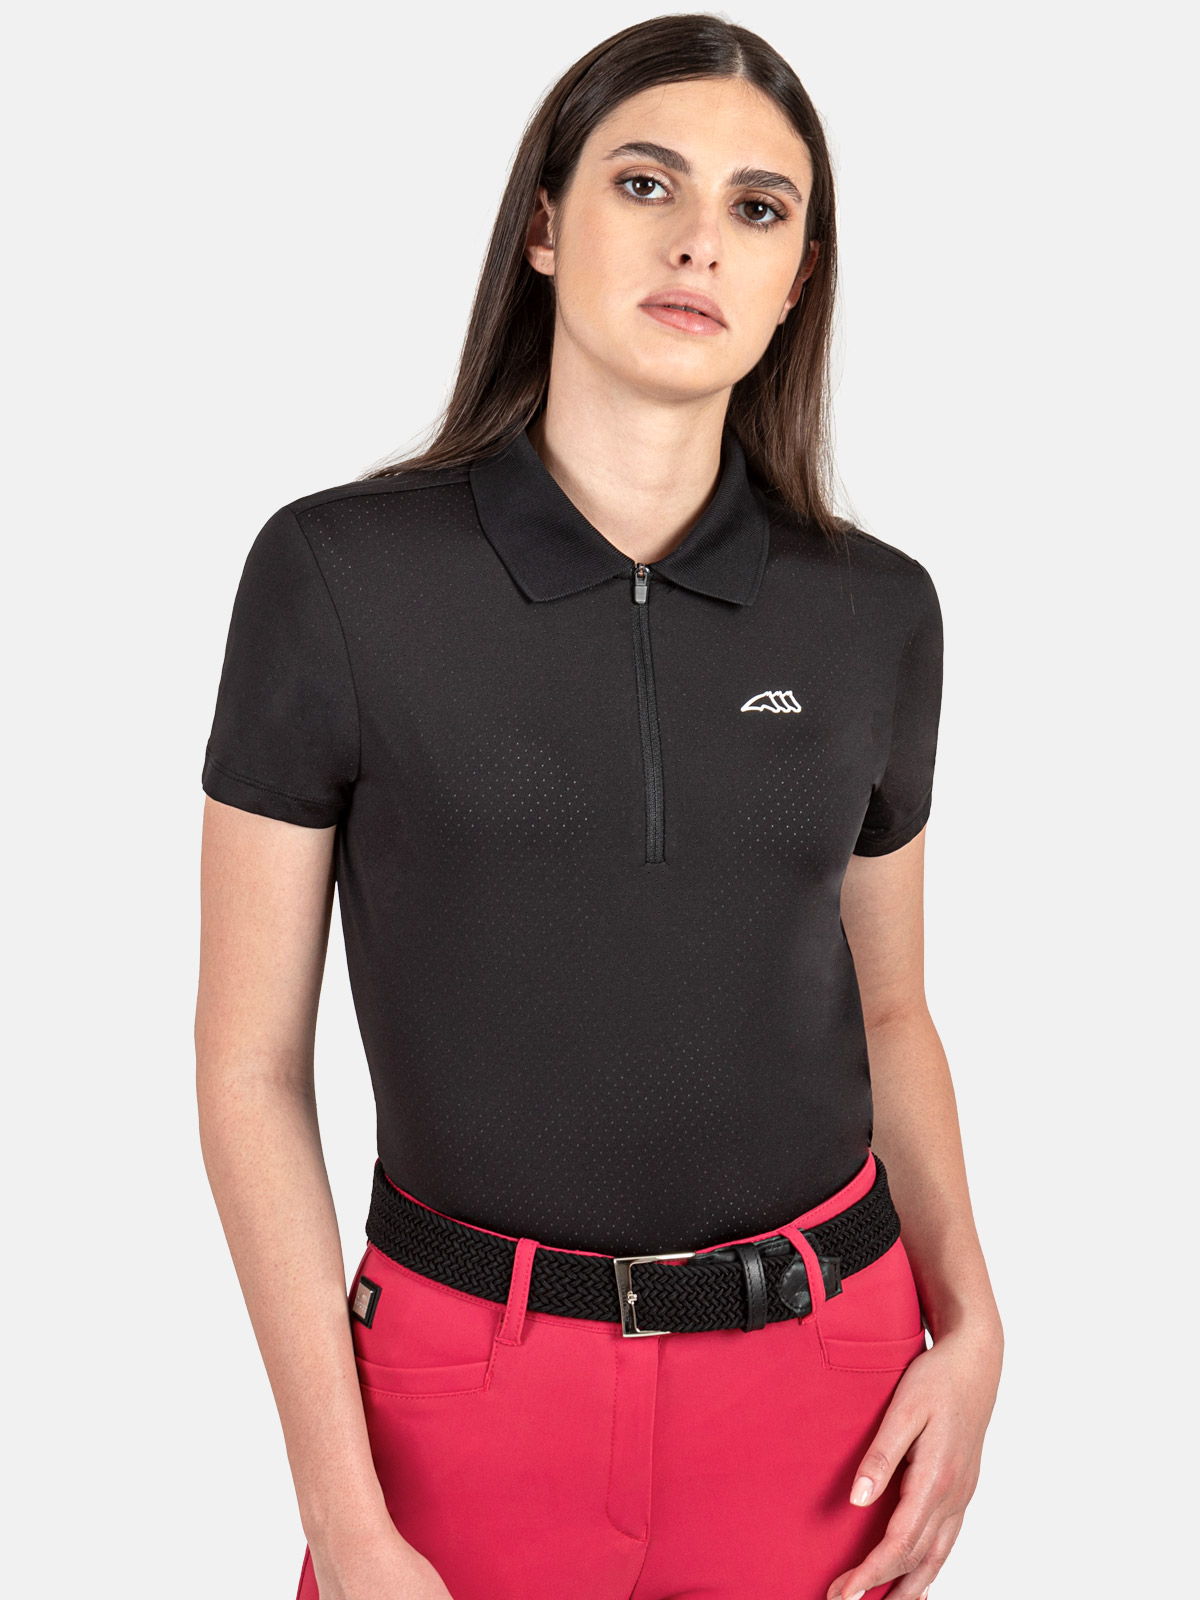 EQUILINE Damen Funktions Polo Shirt Carenc - blue - M - 2